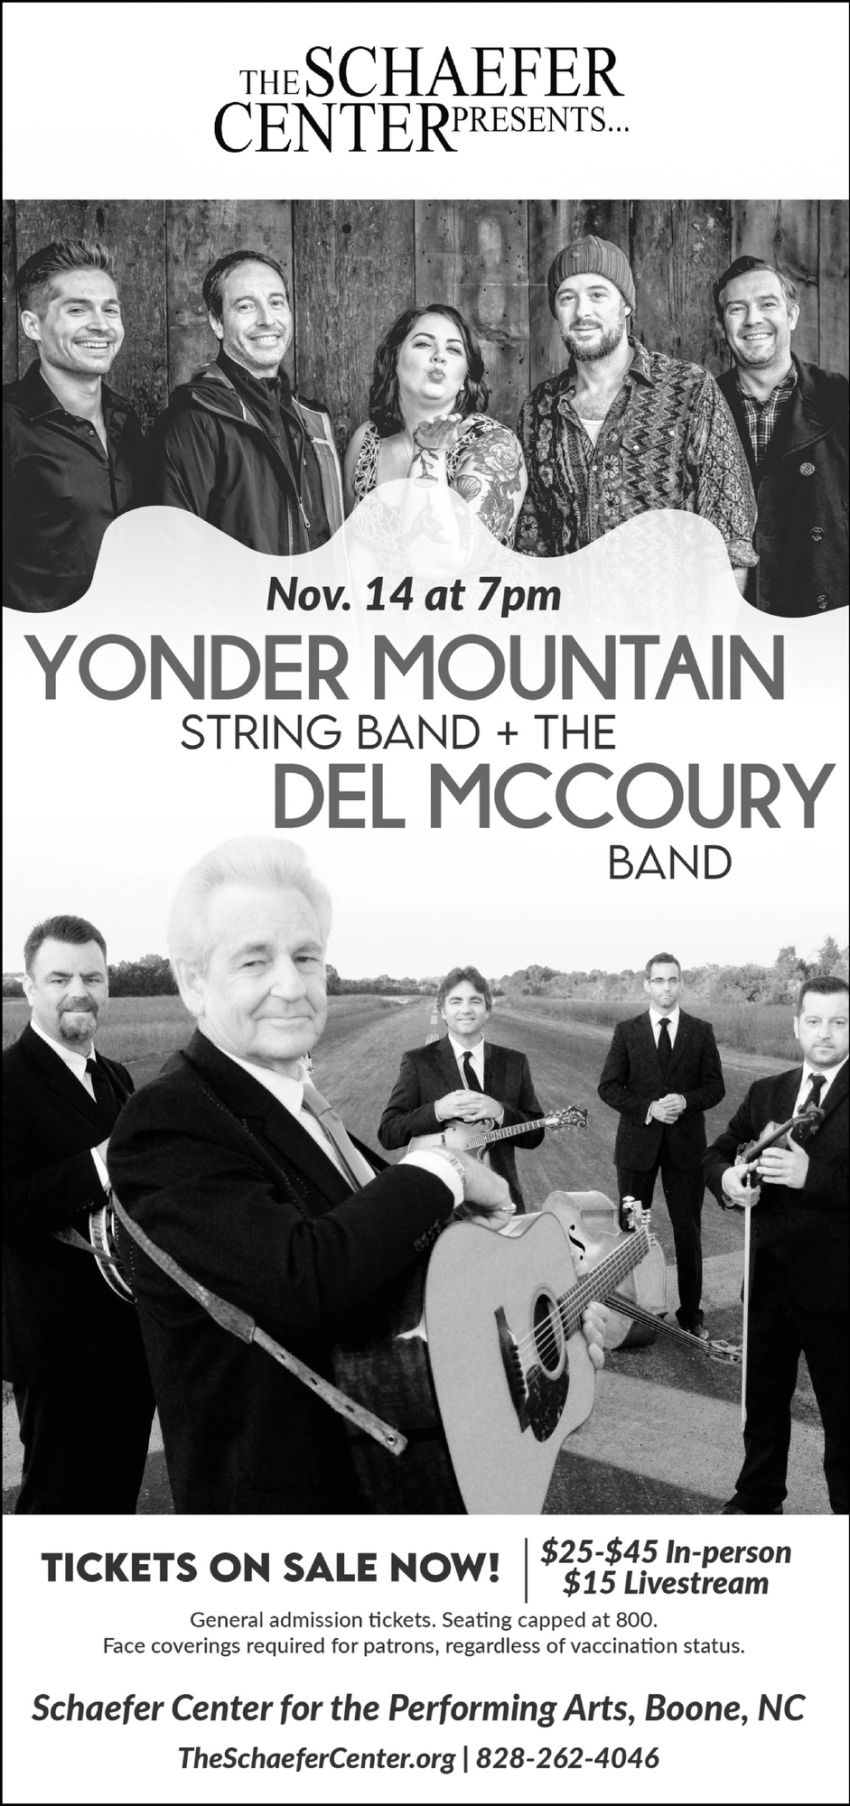 Yonder Mountain String Band + The Del McCoury Band